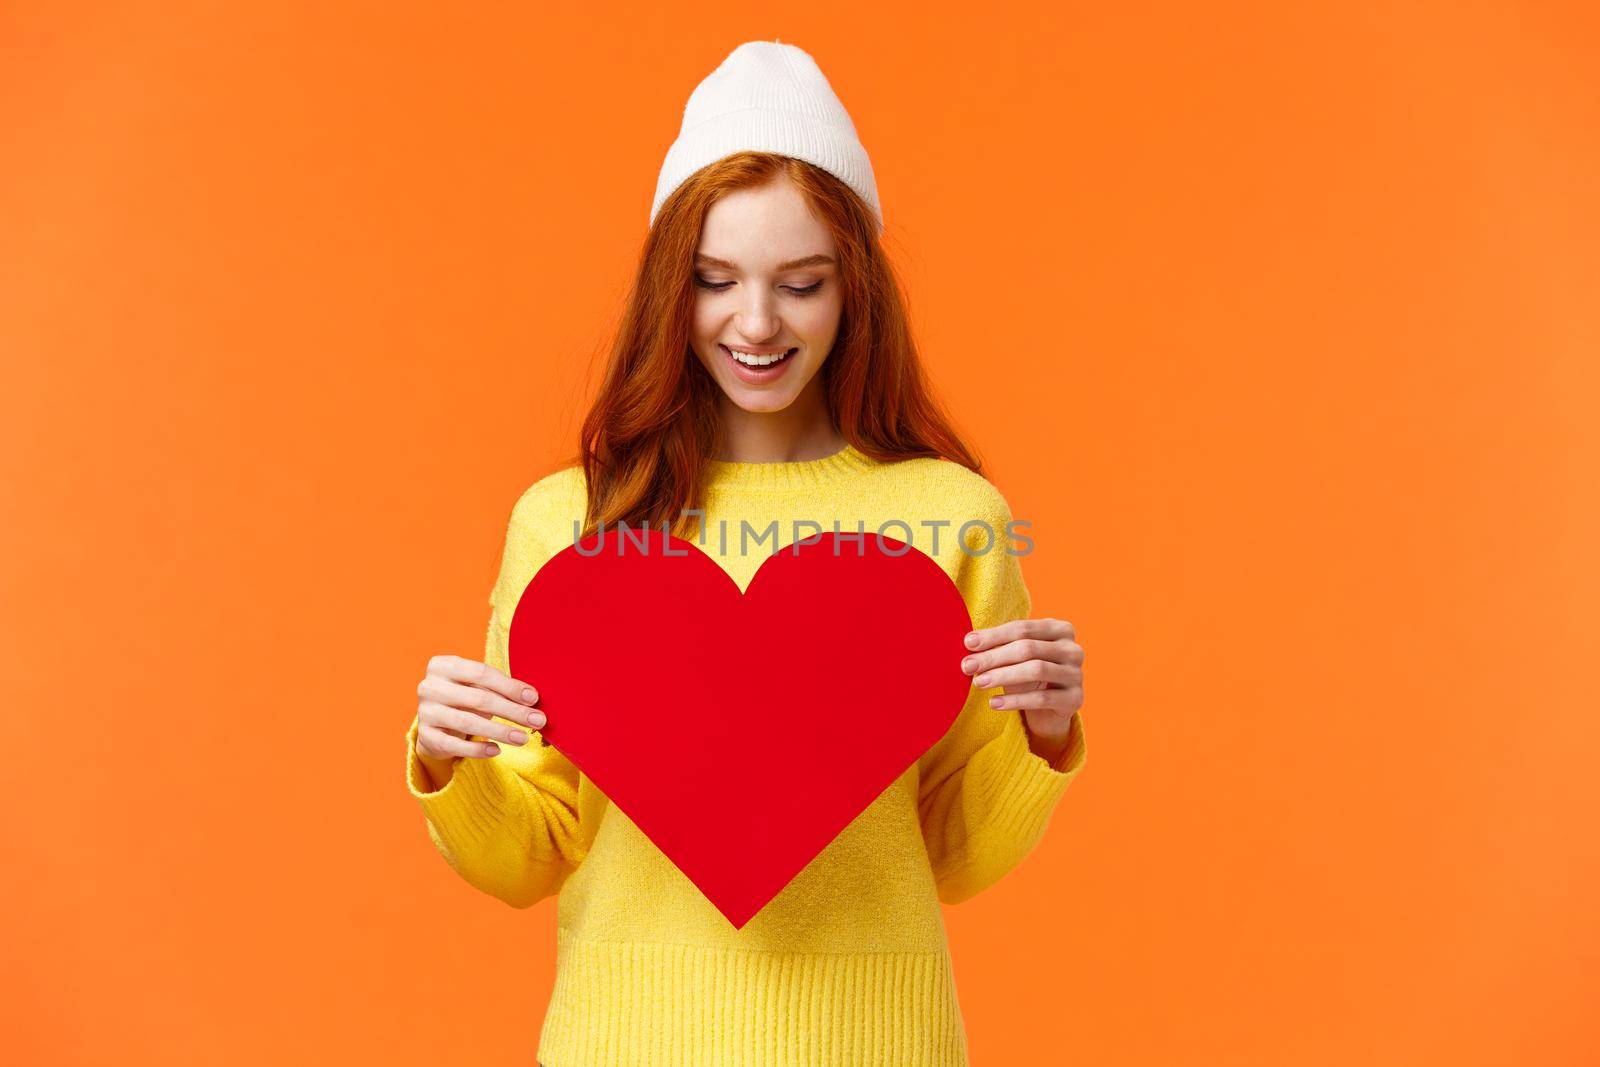 Waist-up portrait lovely romantic girl prepare gift for girlfriend on valentines day, asking be my valentine holding big red heart sign and smiling silly, orange background, wear winter hat.